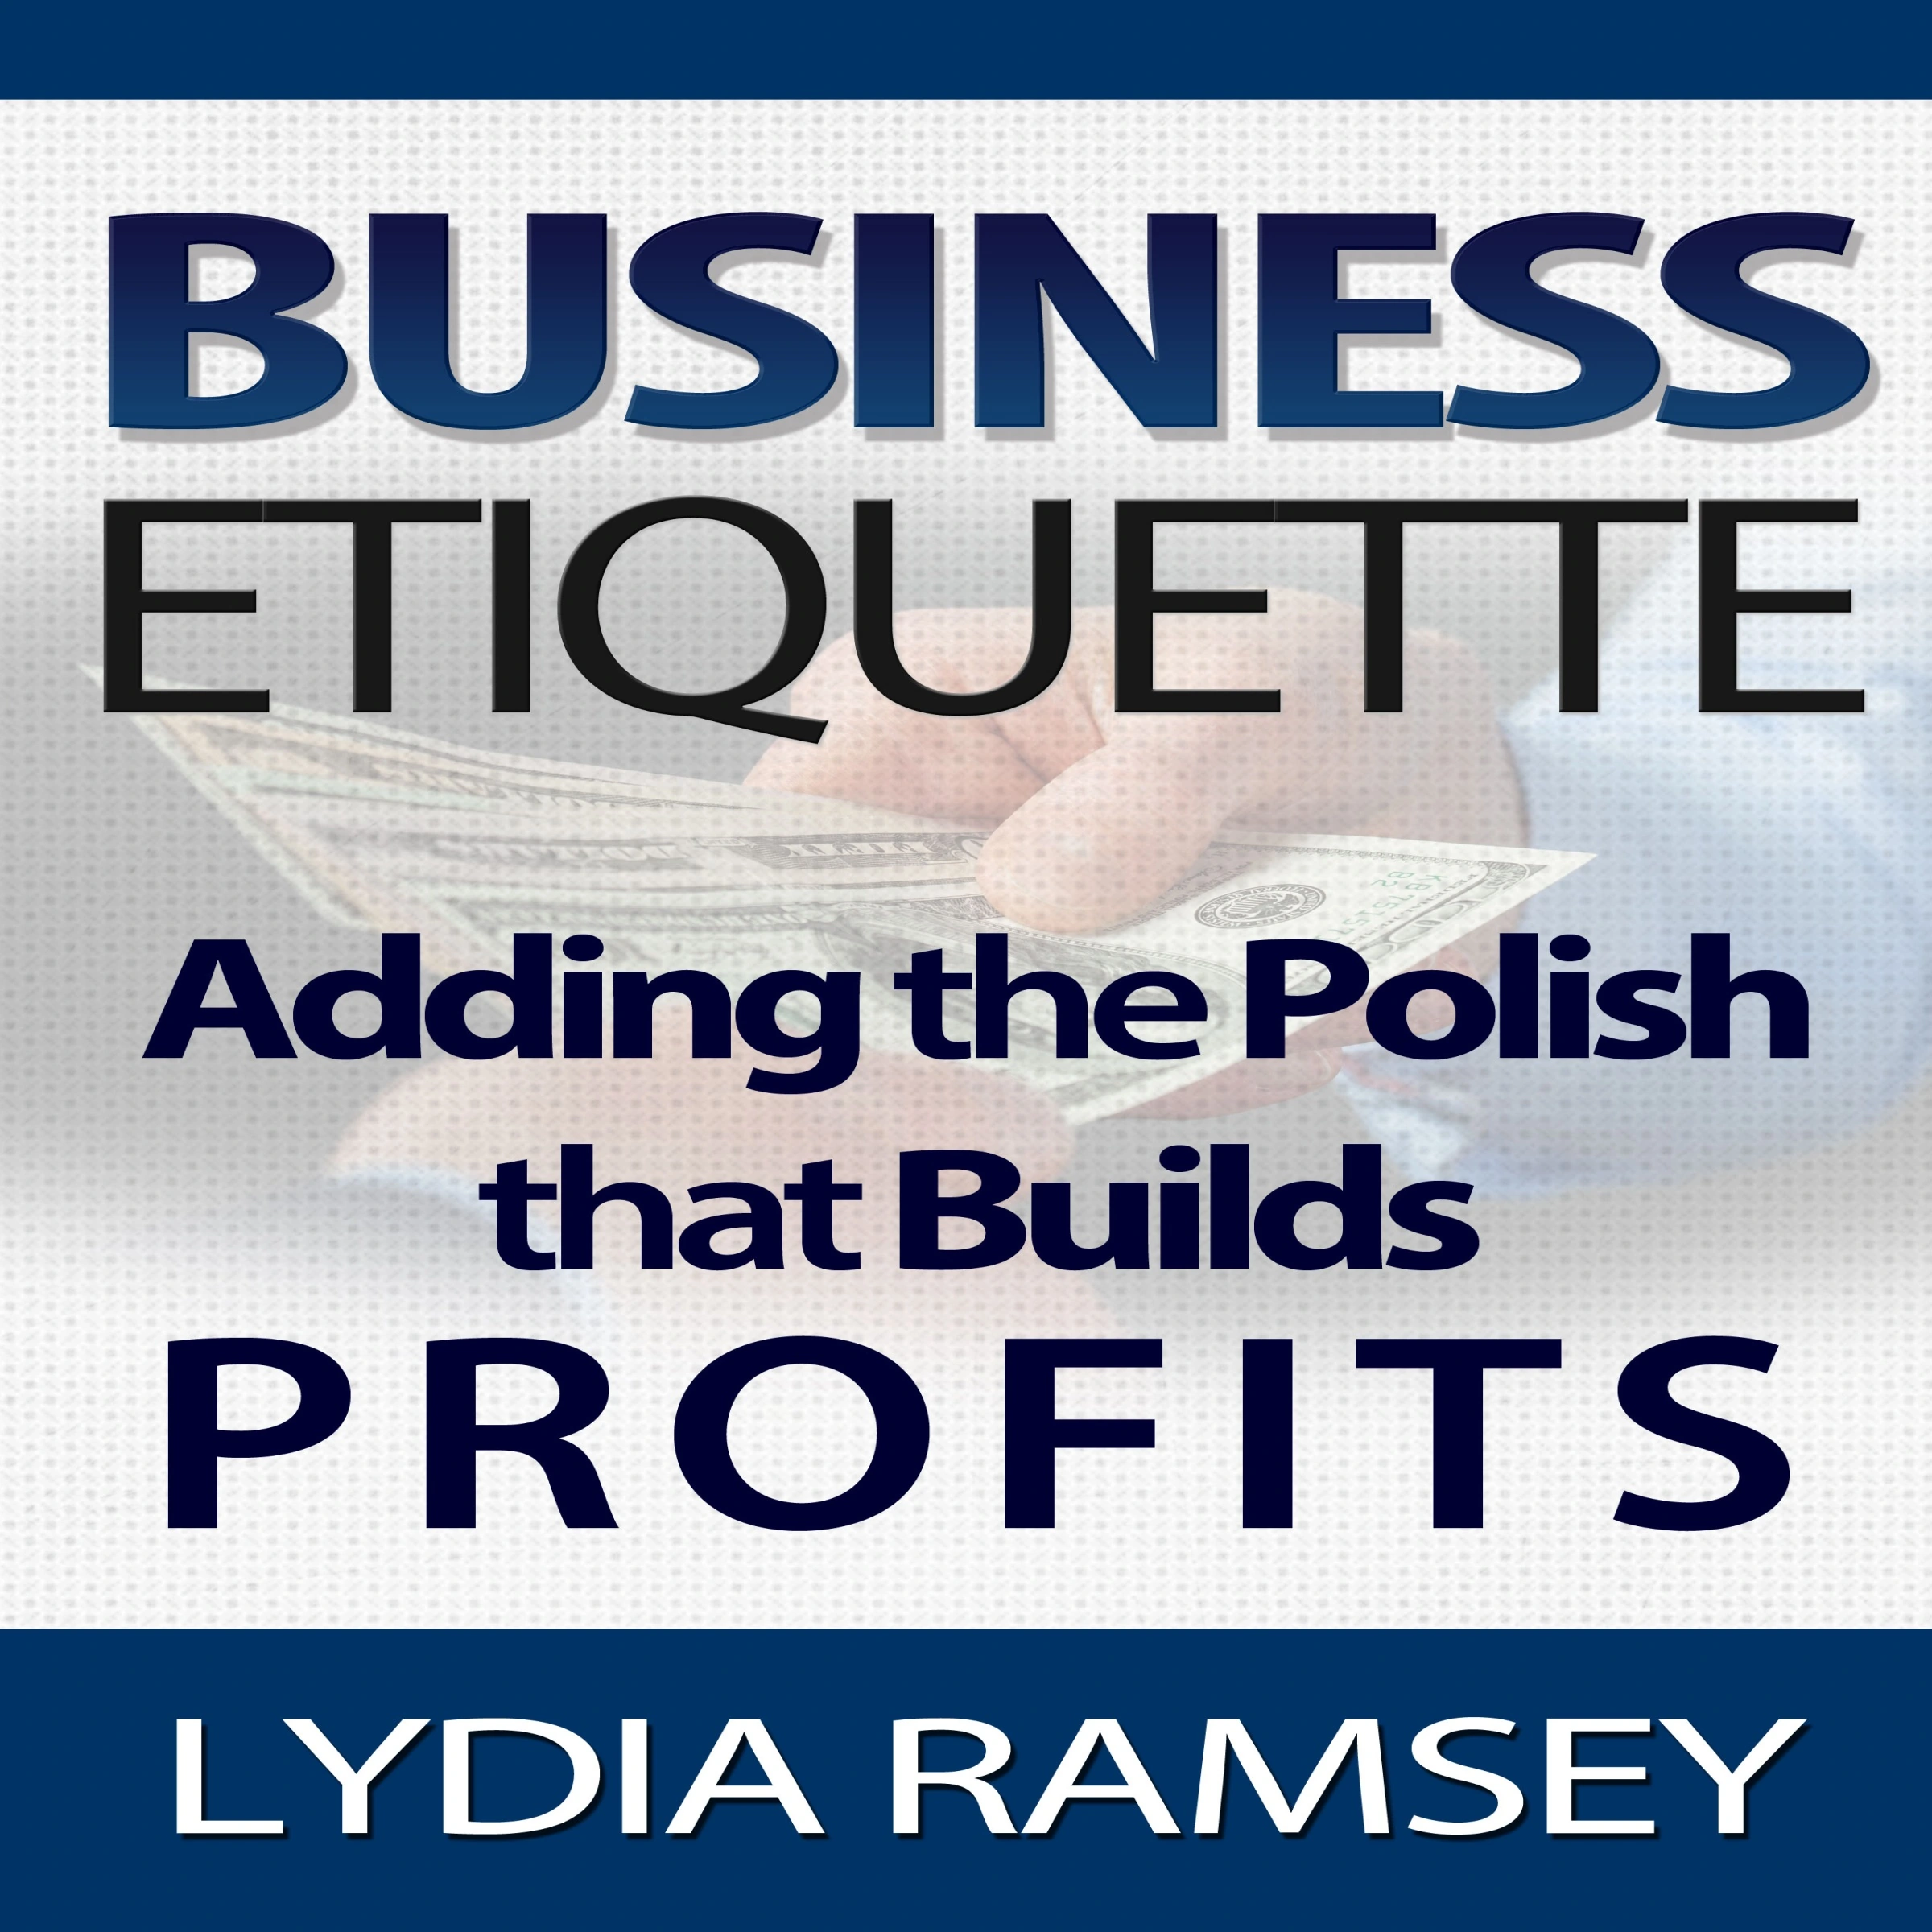 Business Etiquette – Adding The Polish That Builds Profits Audiobook by Lydia Ramsey